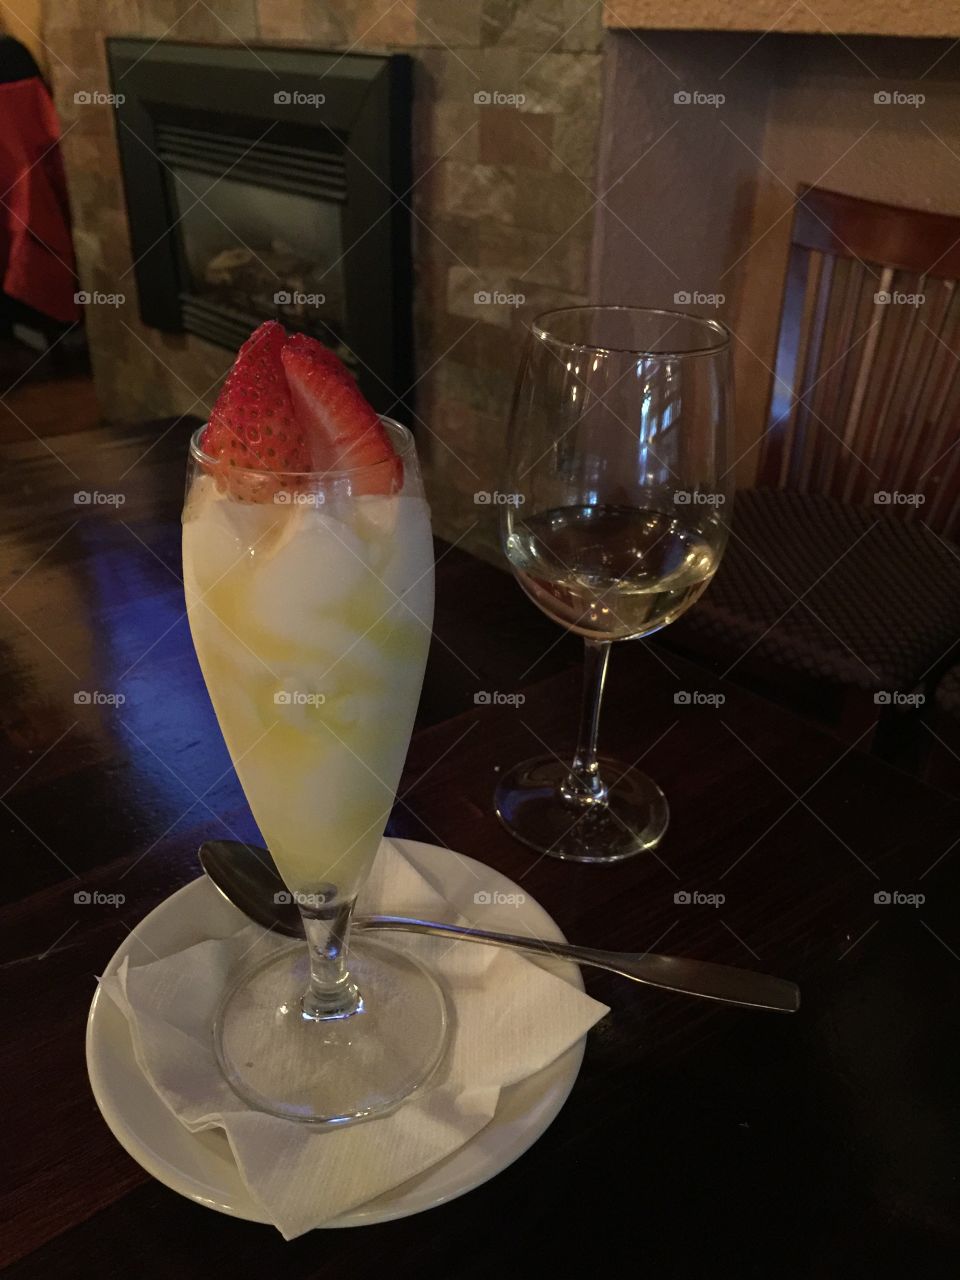 Stunning delicate limoncello gelato served in a champagne flute glass topped with strawberries; with a glass of Pinot Grigio.